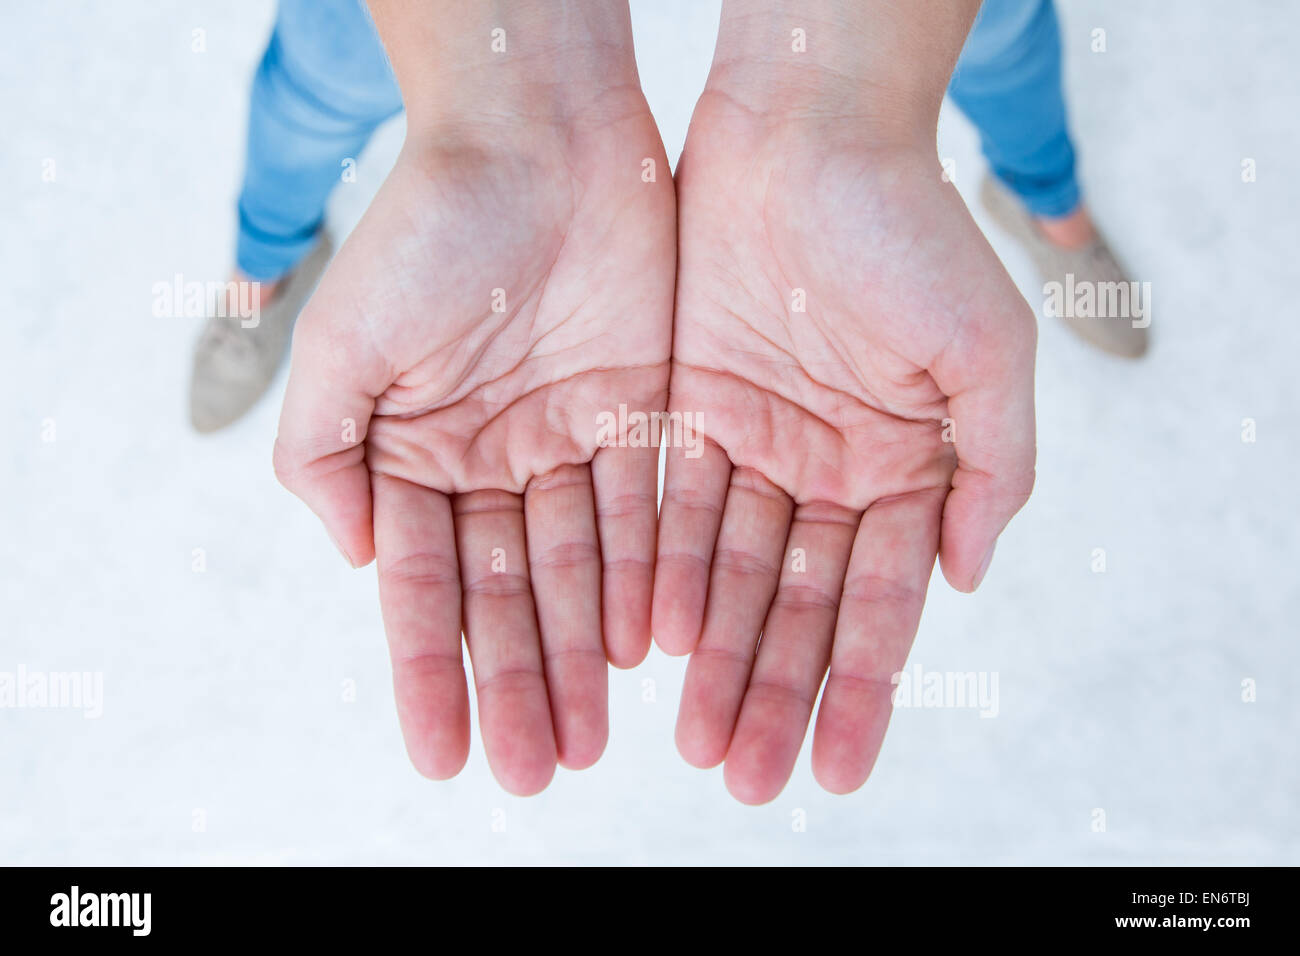 Woman showing her hands Stock Photo